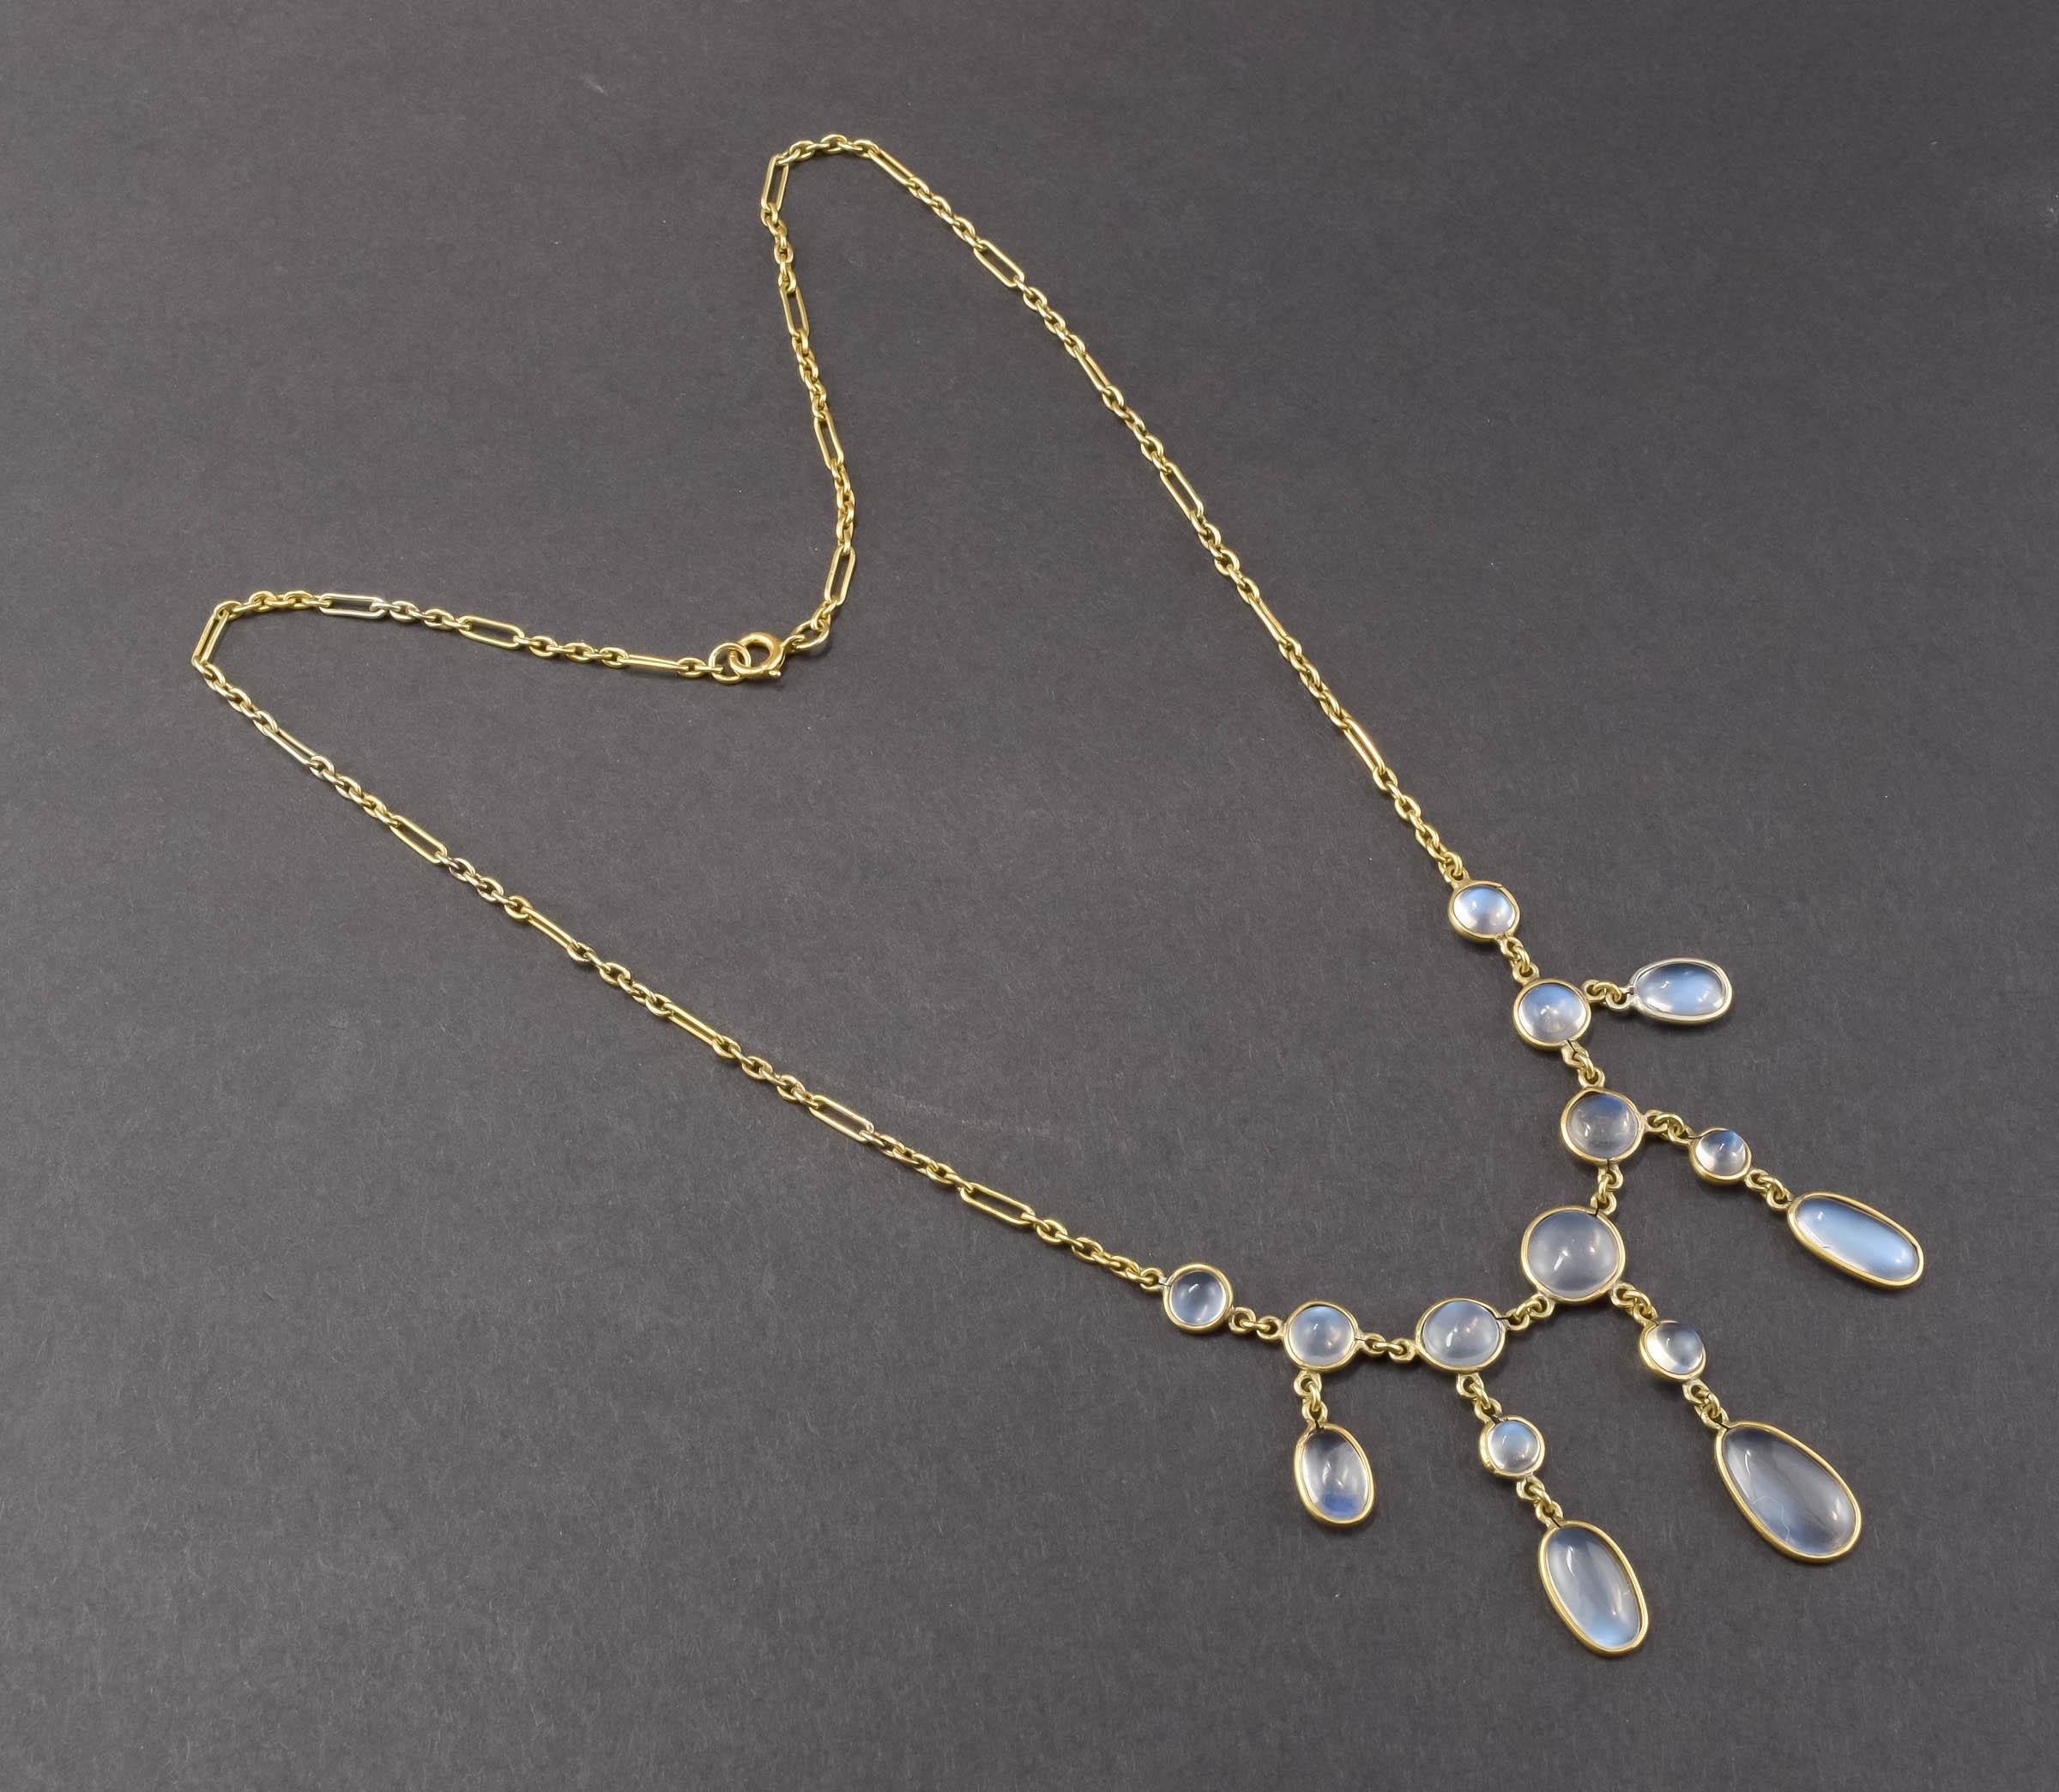 Antique 15K Gold Moonstone Drop Necklace with Fancy Link Chain 2